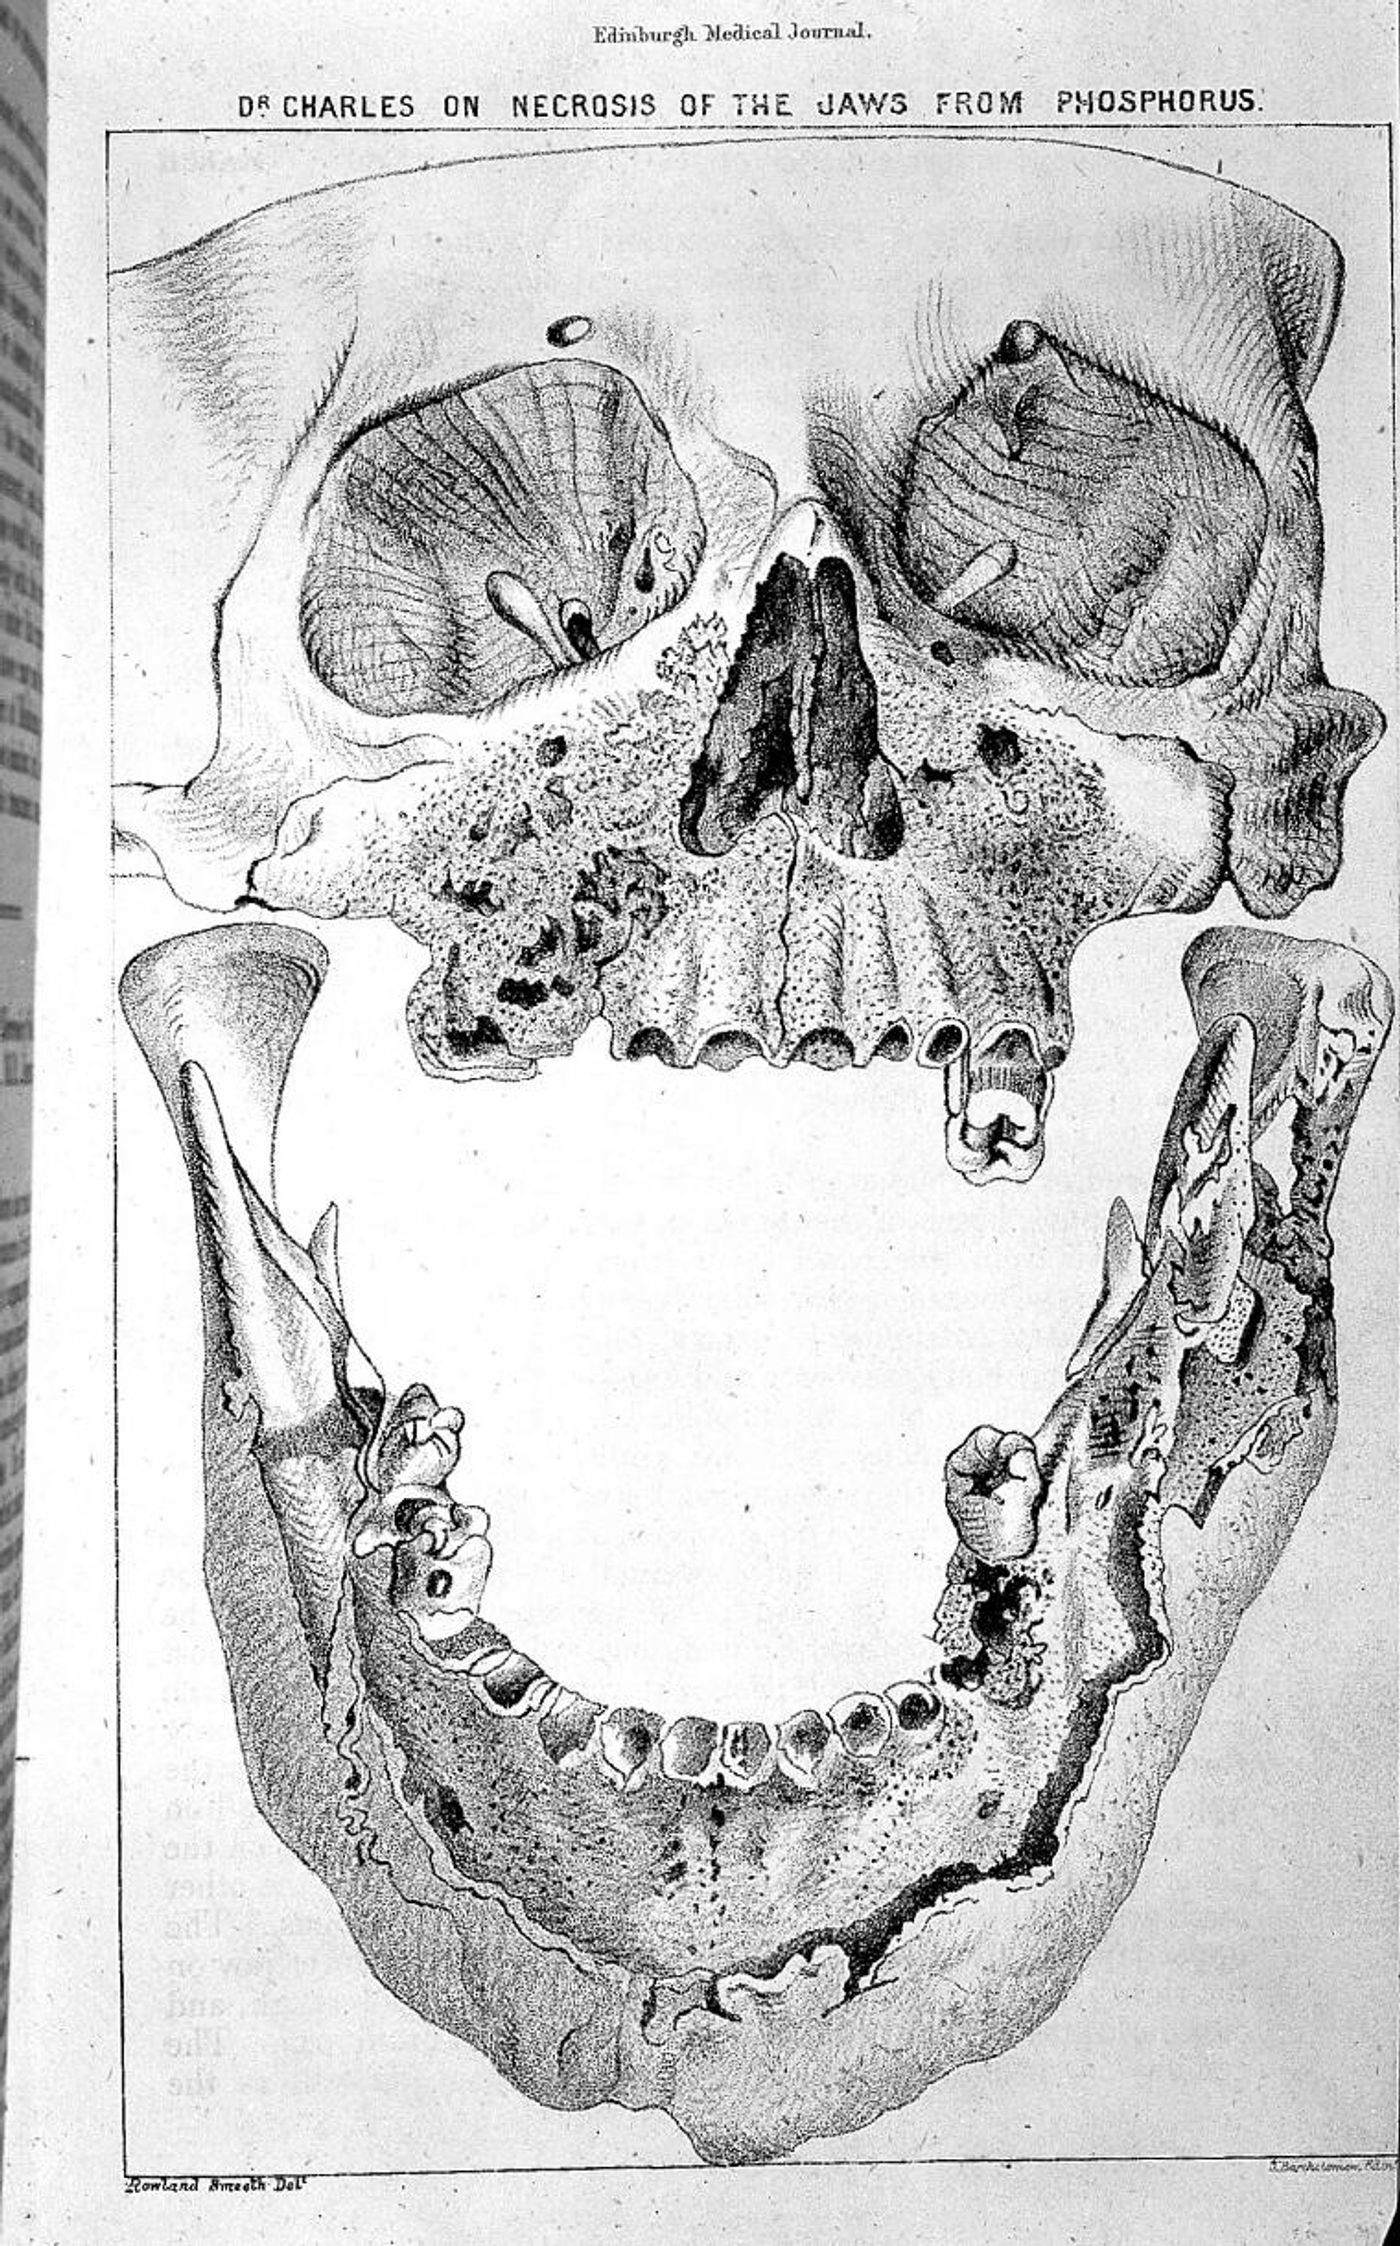 Skull with jaw affected by phosphorus poisoning. J. Bartholomew. Public Domain, Wellcome Collection.